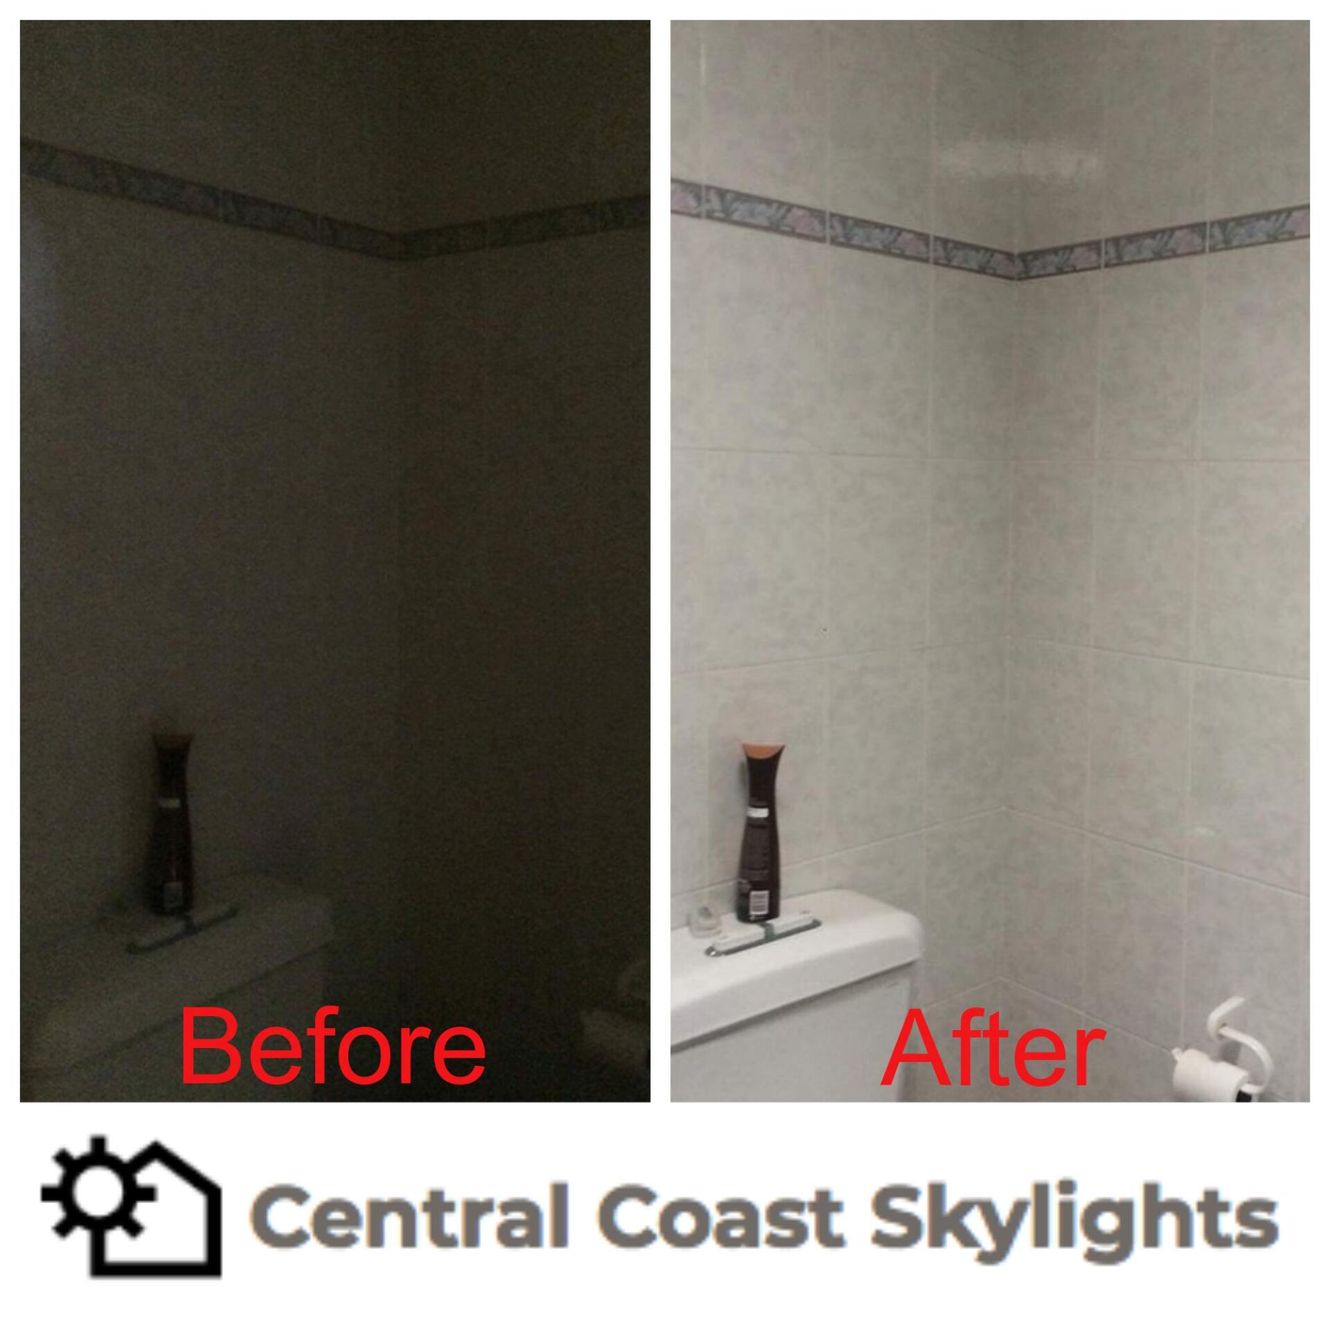 Bathroom before and after — Skylight Installations & Repairs in Central Coast, NSW